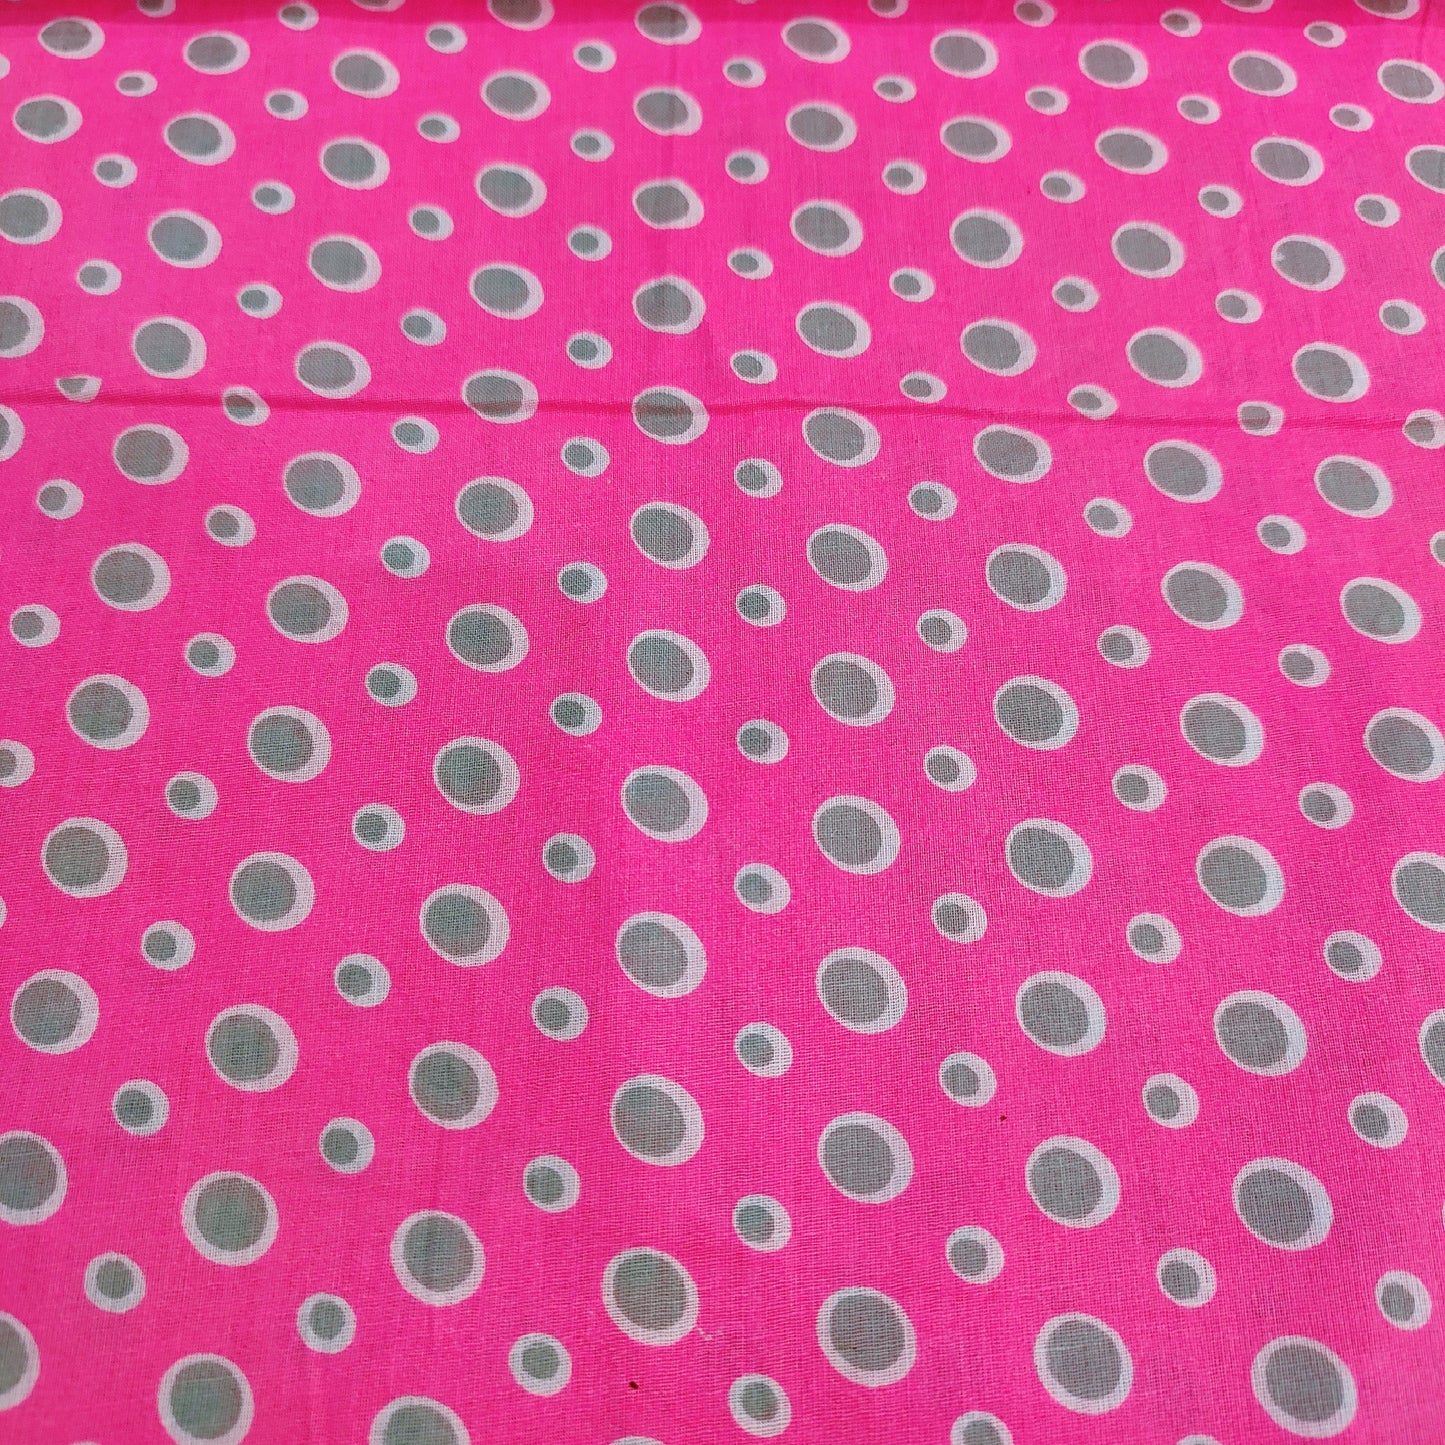 Dotted Neon Pink Cotton Fabric